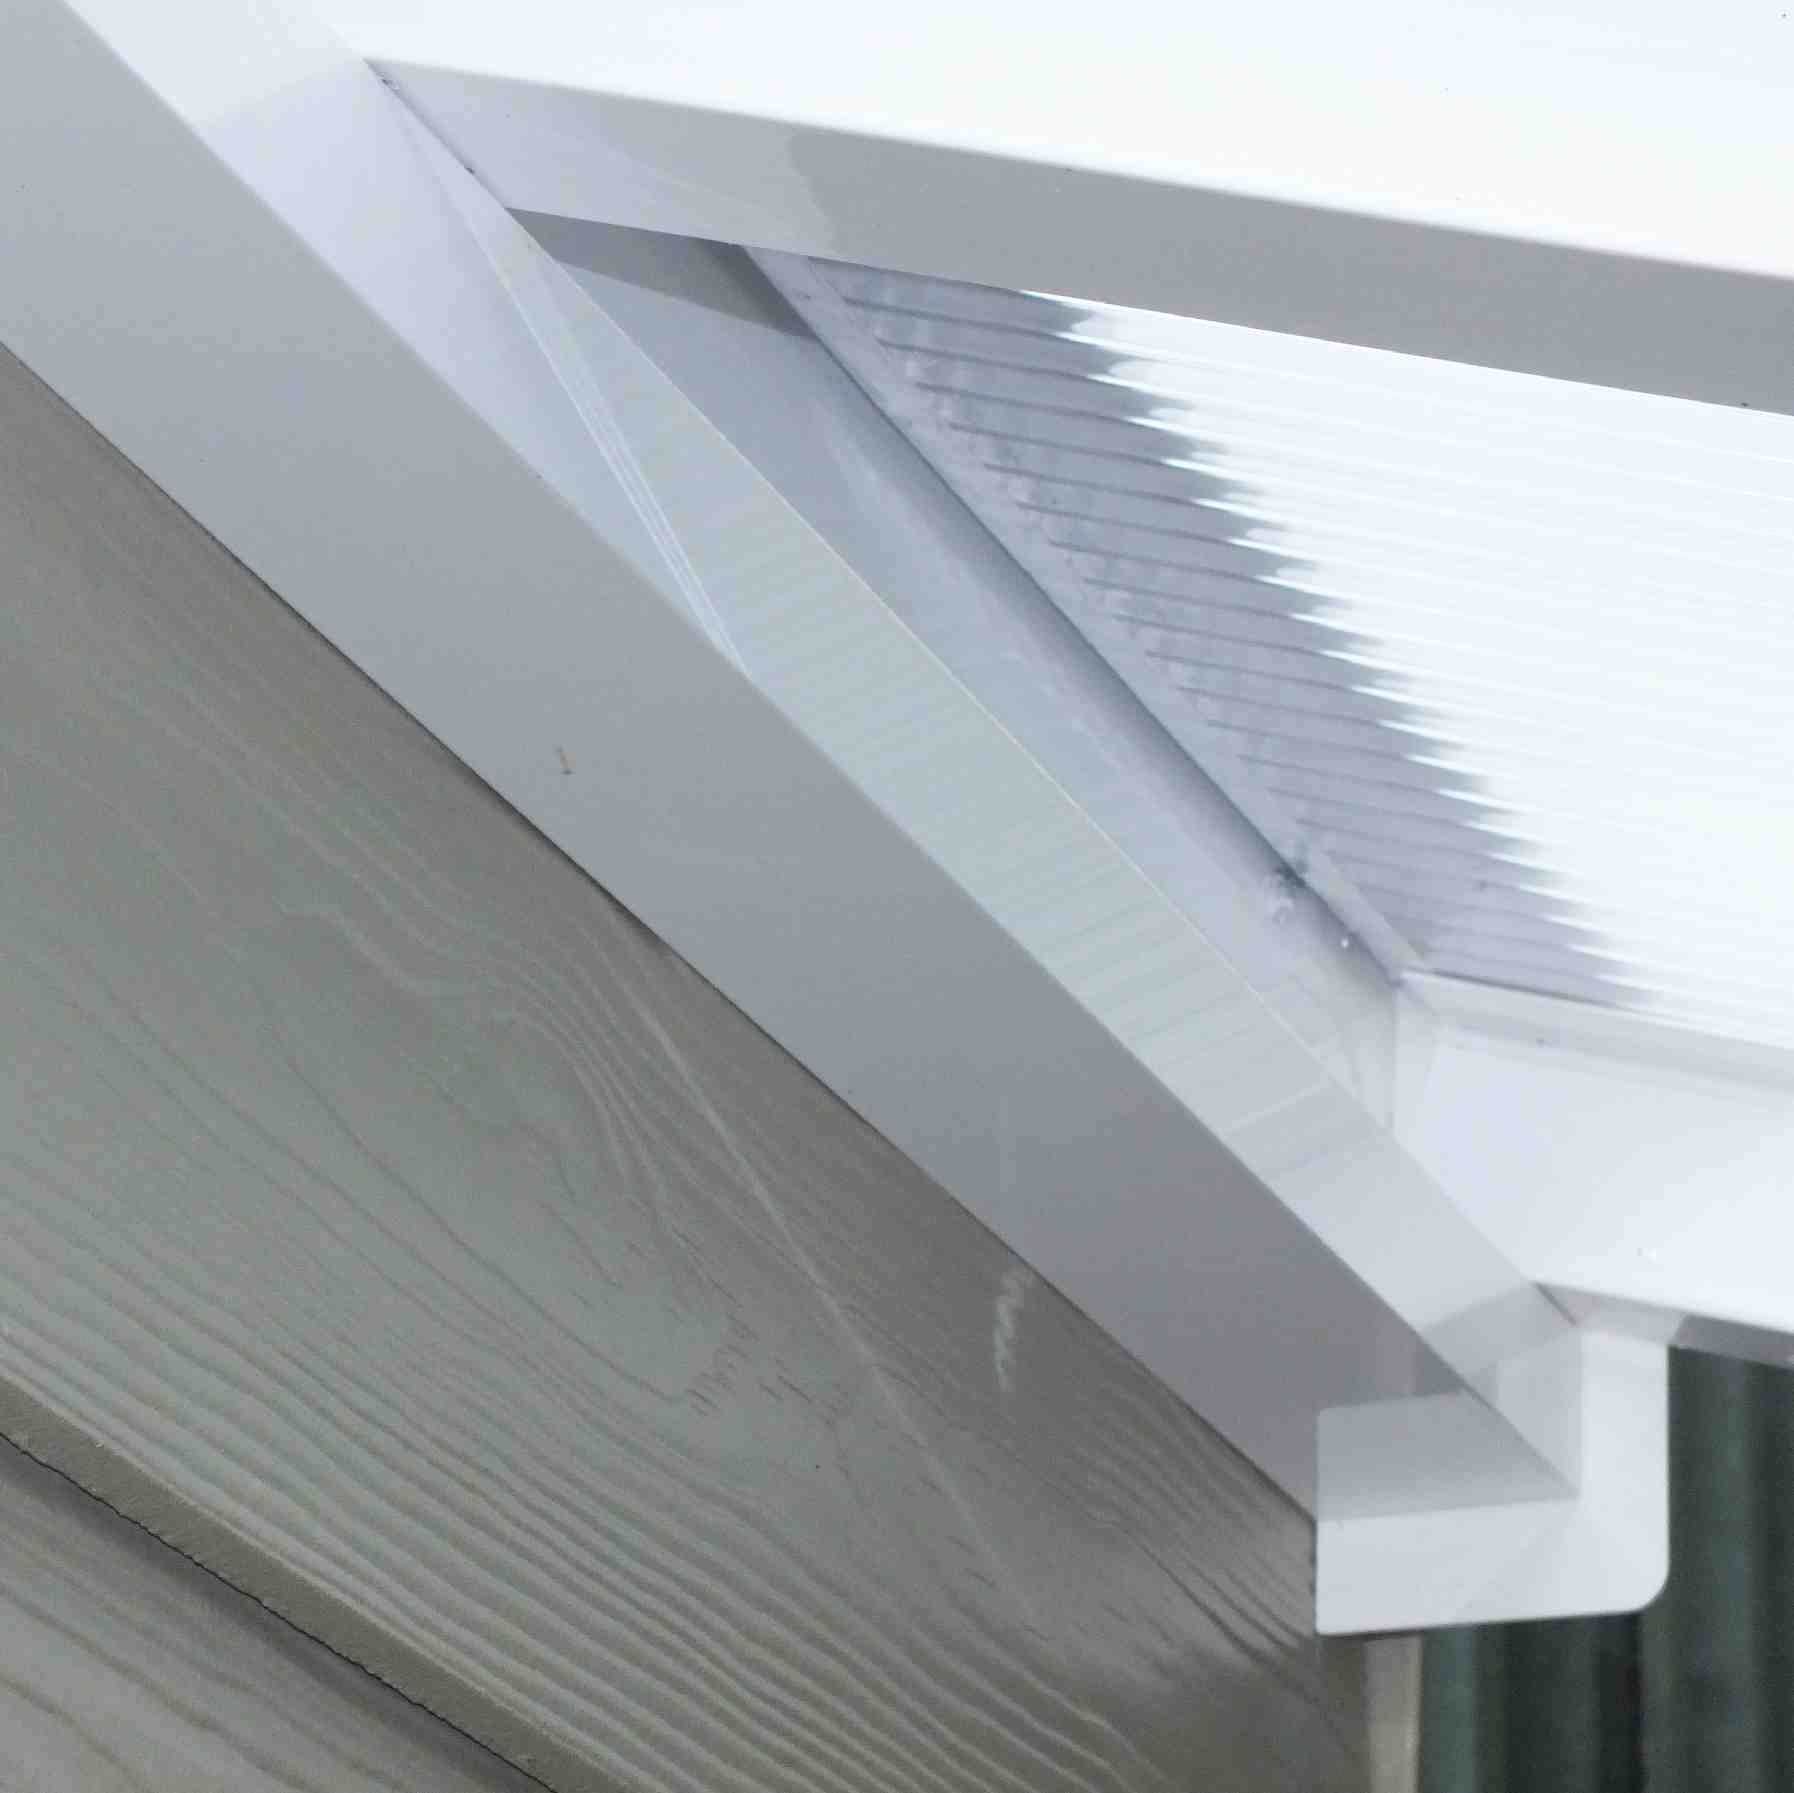 Great deals on Omega Verandah White with 16mm Polycarbonate Glazing - 7.0m (W) x 4.5m (P), (4) Supporting Posts